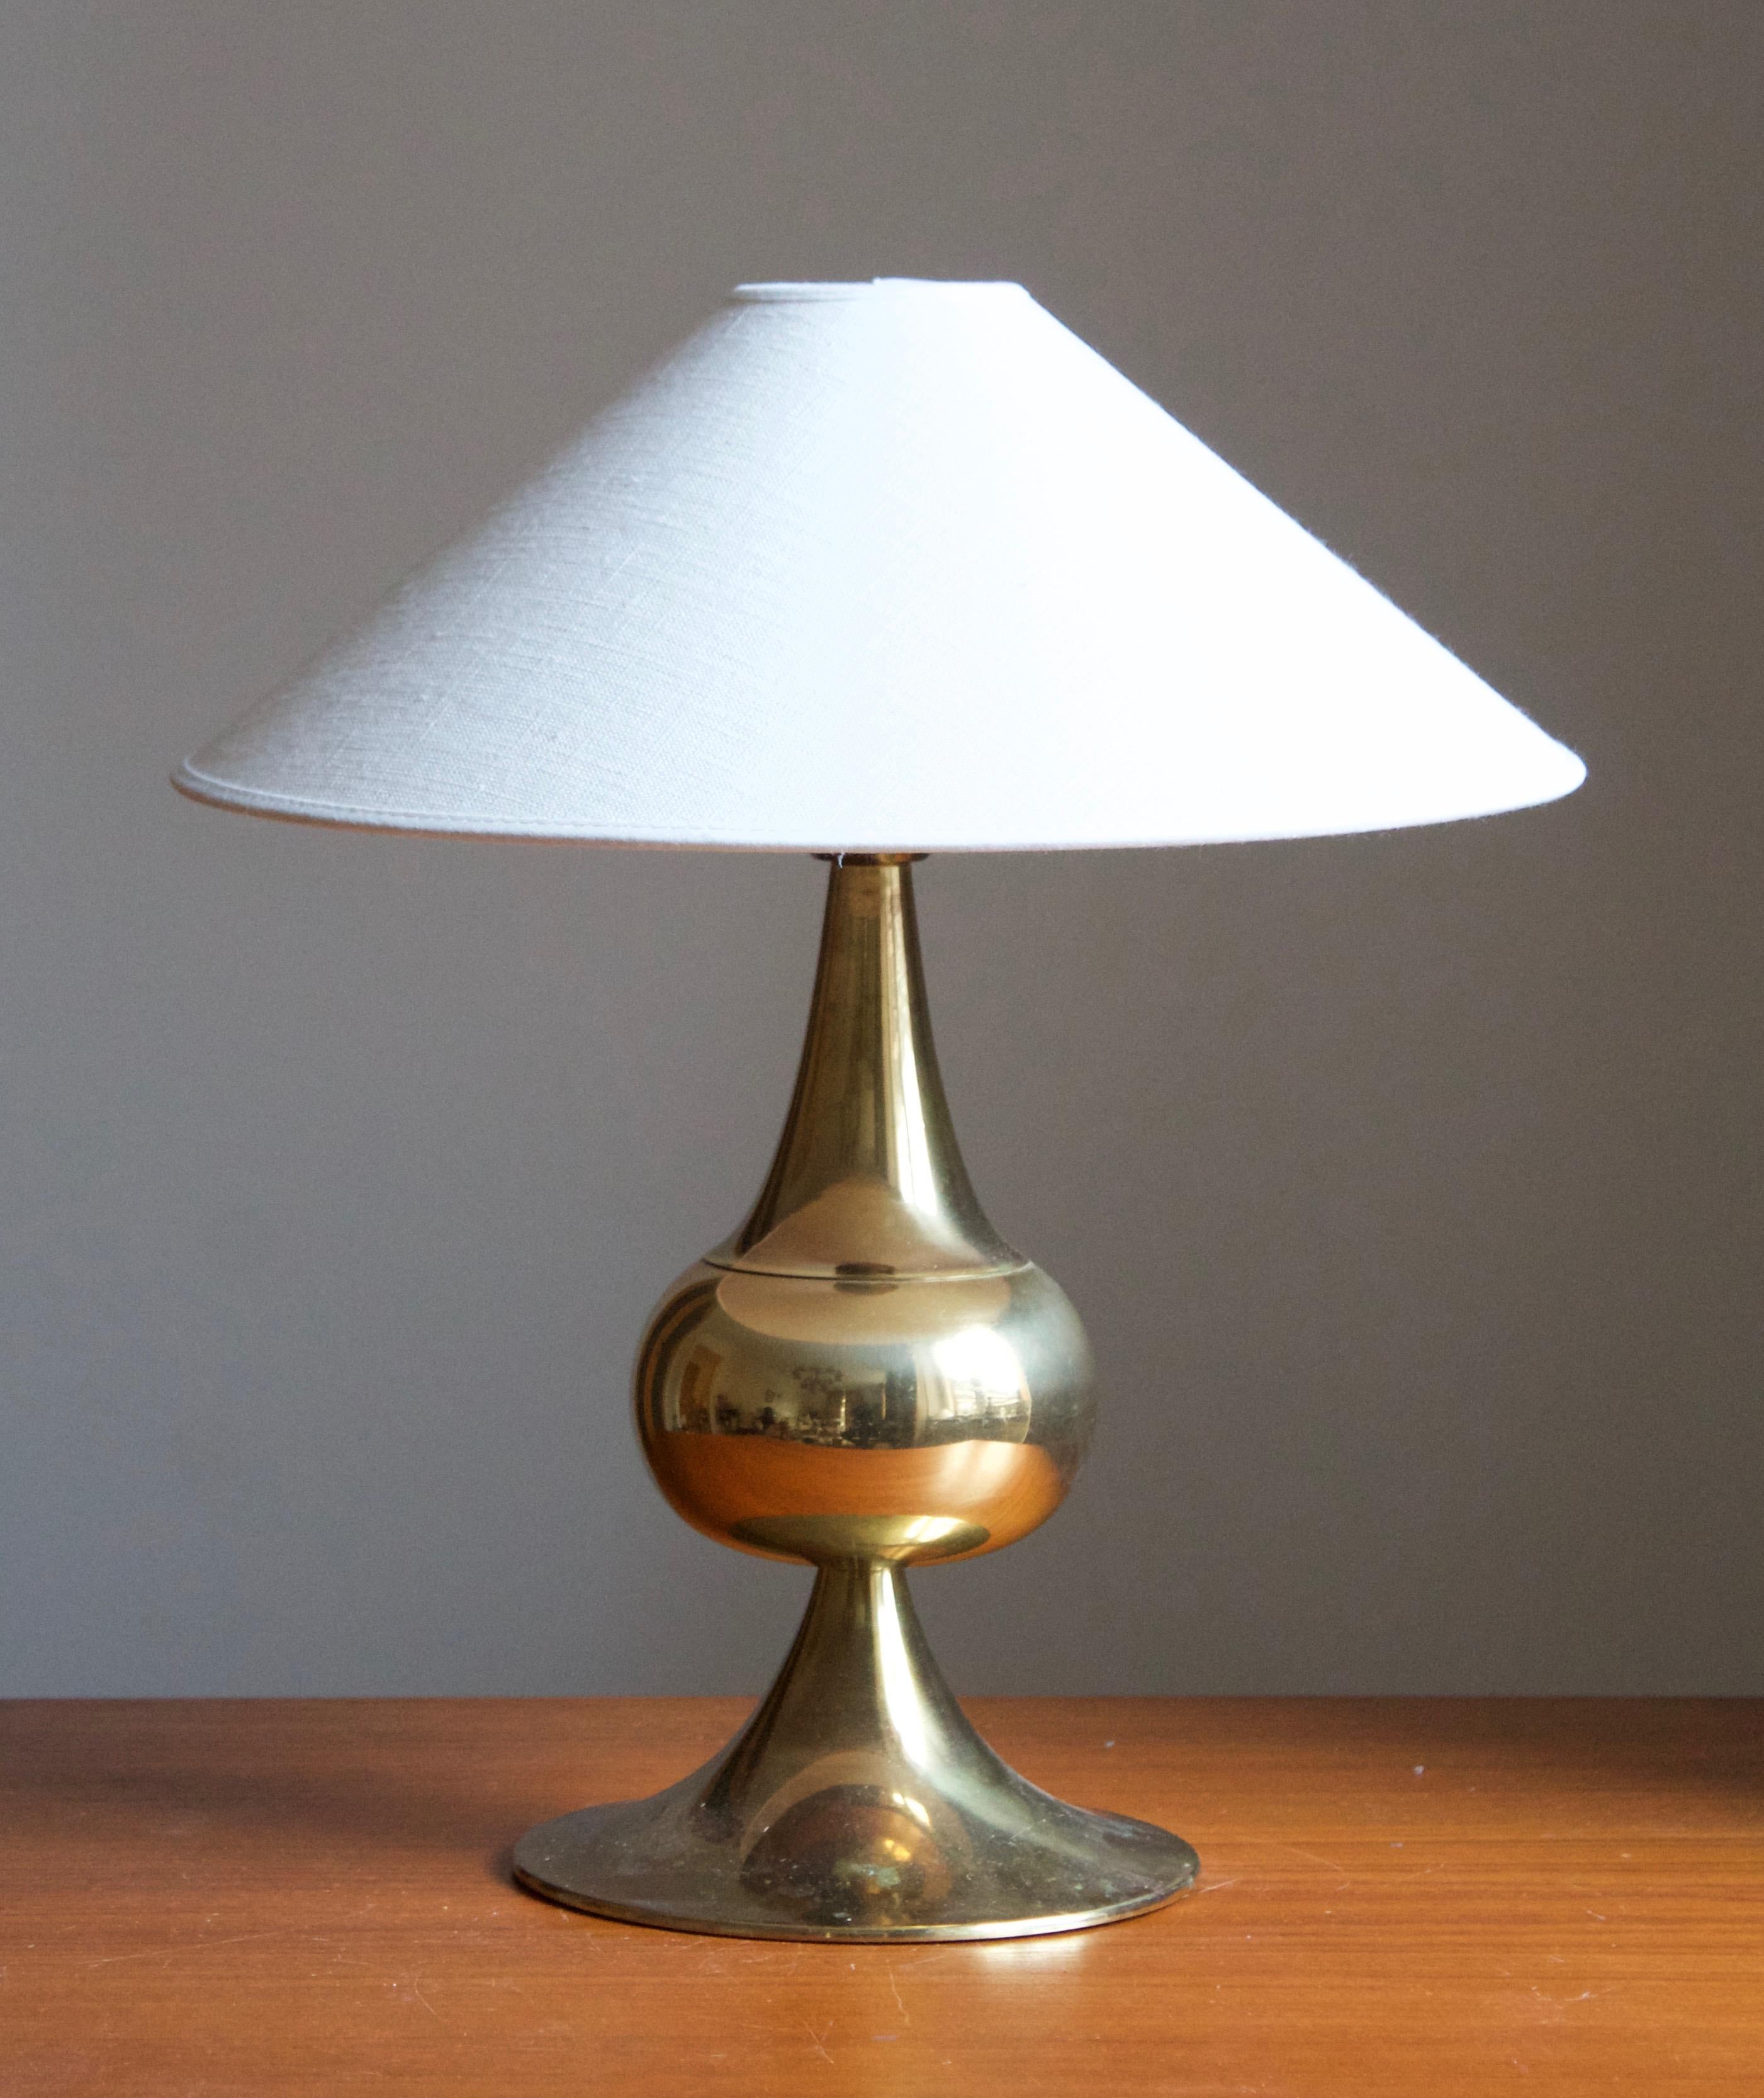 A table lamp, designed by Kjell Blomberg and produced by Örsjö Belysning, Sweden, 1970s. Labeled

Sold without lampshades. Stated dimensions exclude lampshade.

Other designers of the period include Hans Agne Jakobsson, Paavo Tynell, Josef